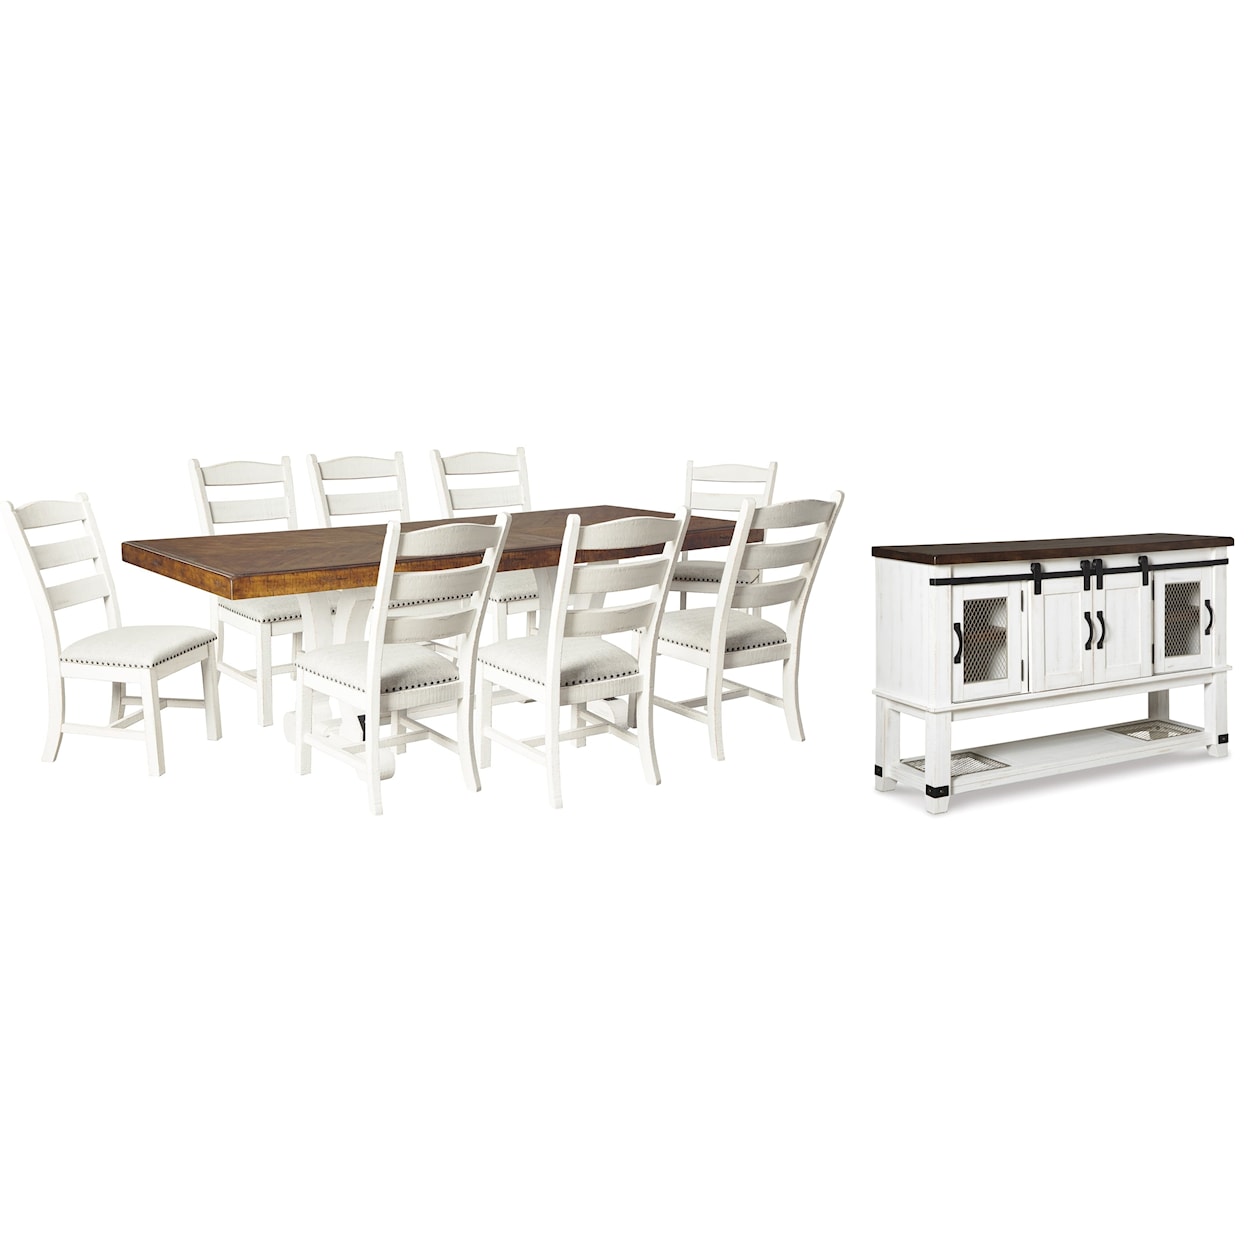 StyleLine PESTO2 SAGE Dining Table and 8 Chairs with Server